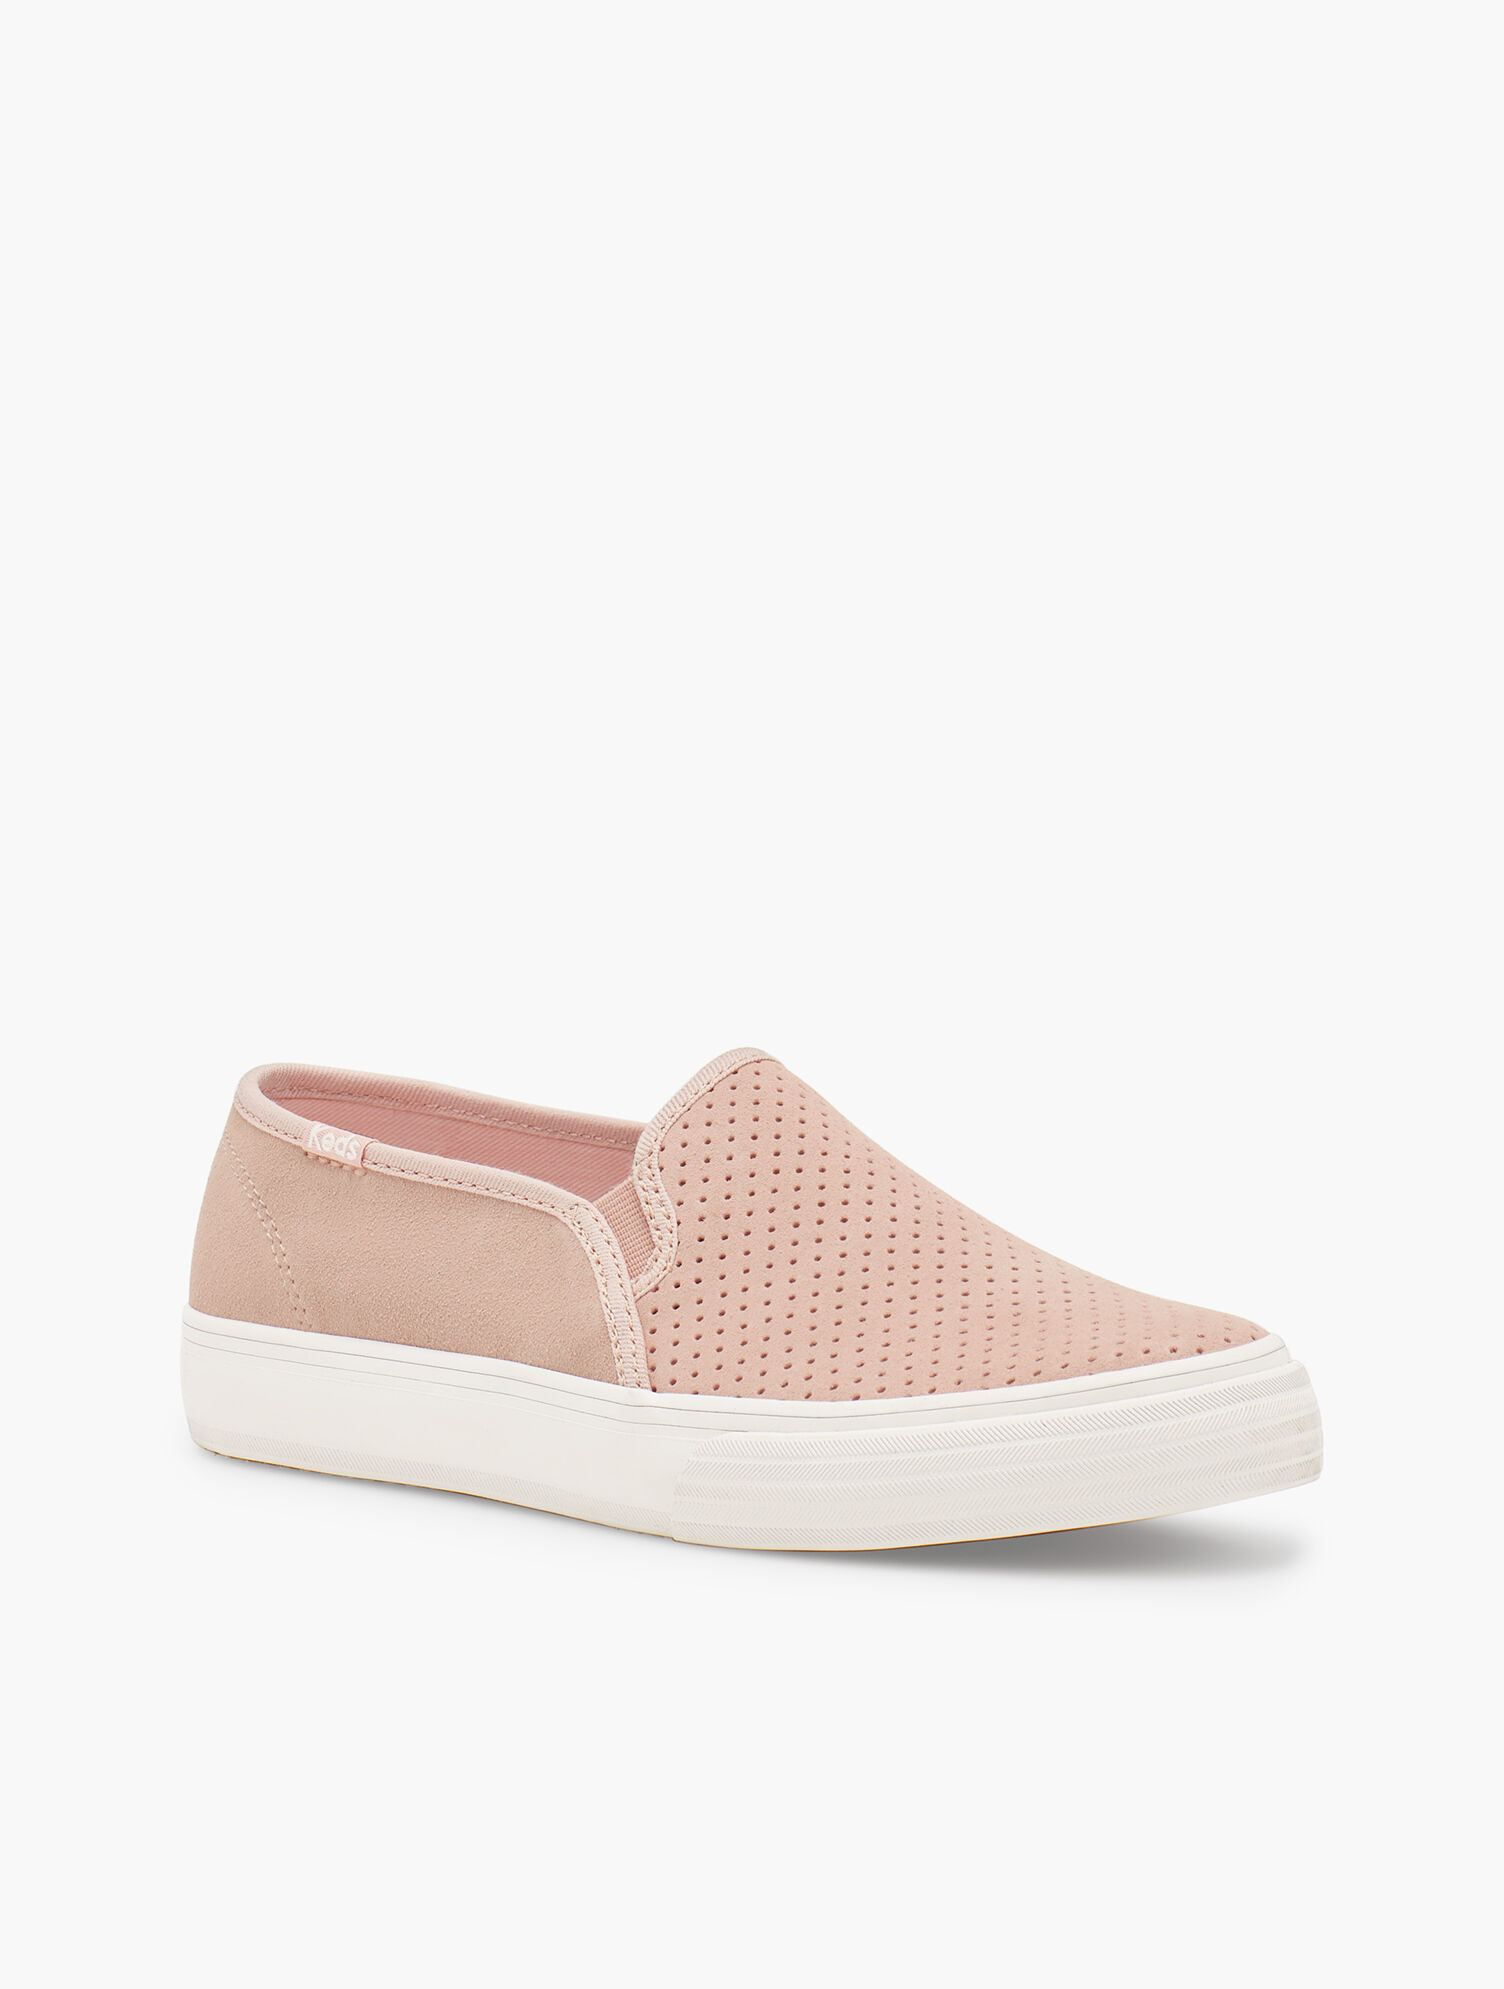 Keds(R) Double Decker Perf Suede Slip-On Sneakers | Talbots